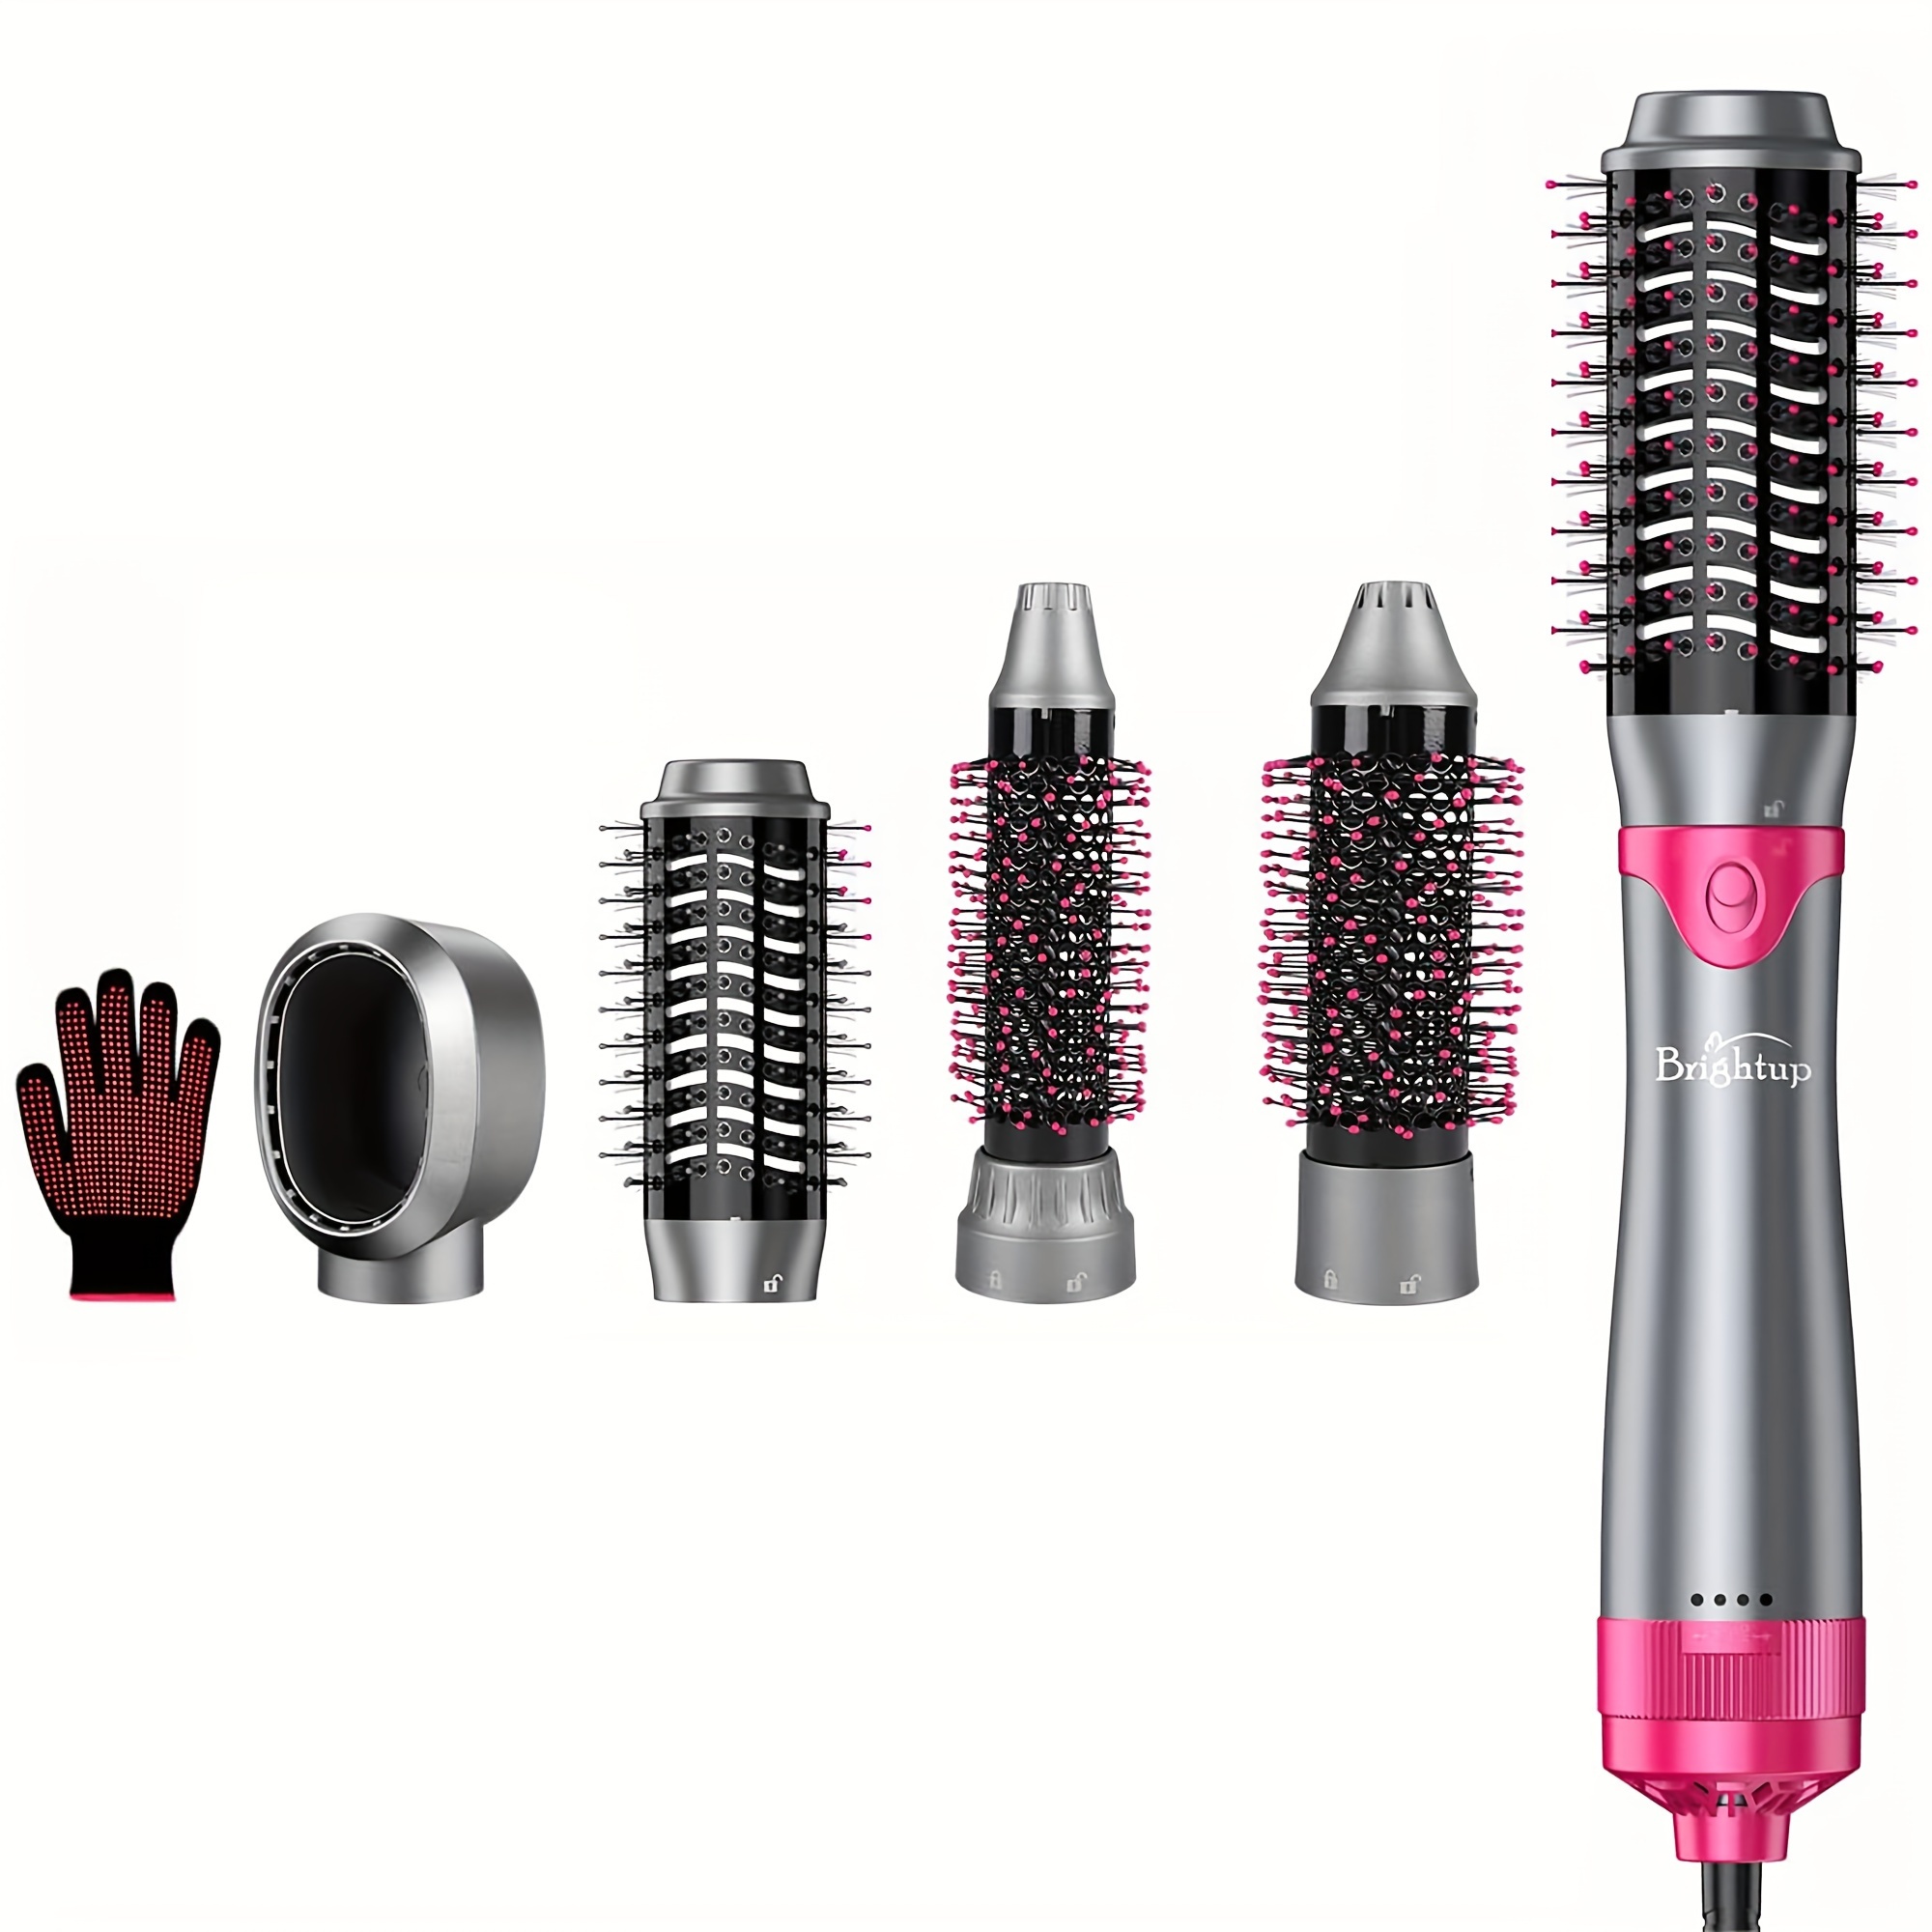 

4 In 1 Blow Dryer Brush & Volumizer With Negative Ionic Technology, Detachable & Interchangeable Brush Head, Hair Dryer Brush For Curling, Smoothing & Styling, Heat Protective Glove Included